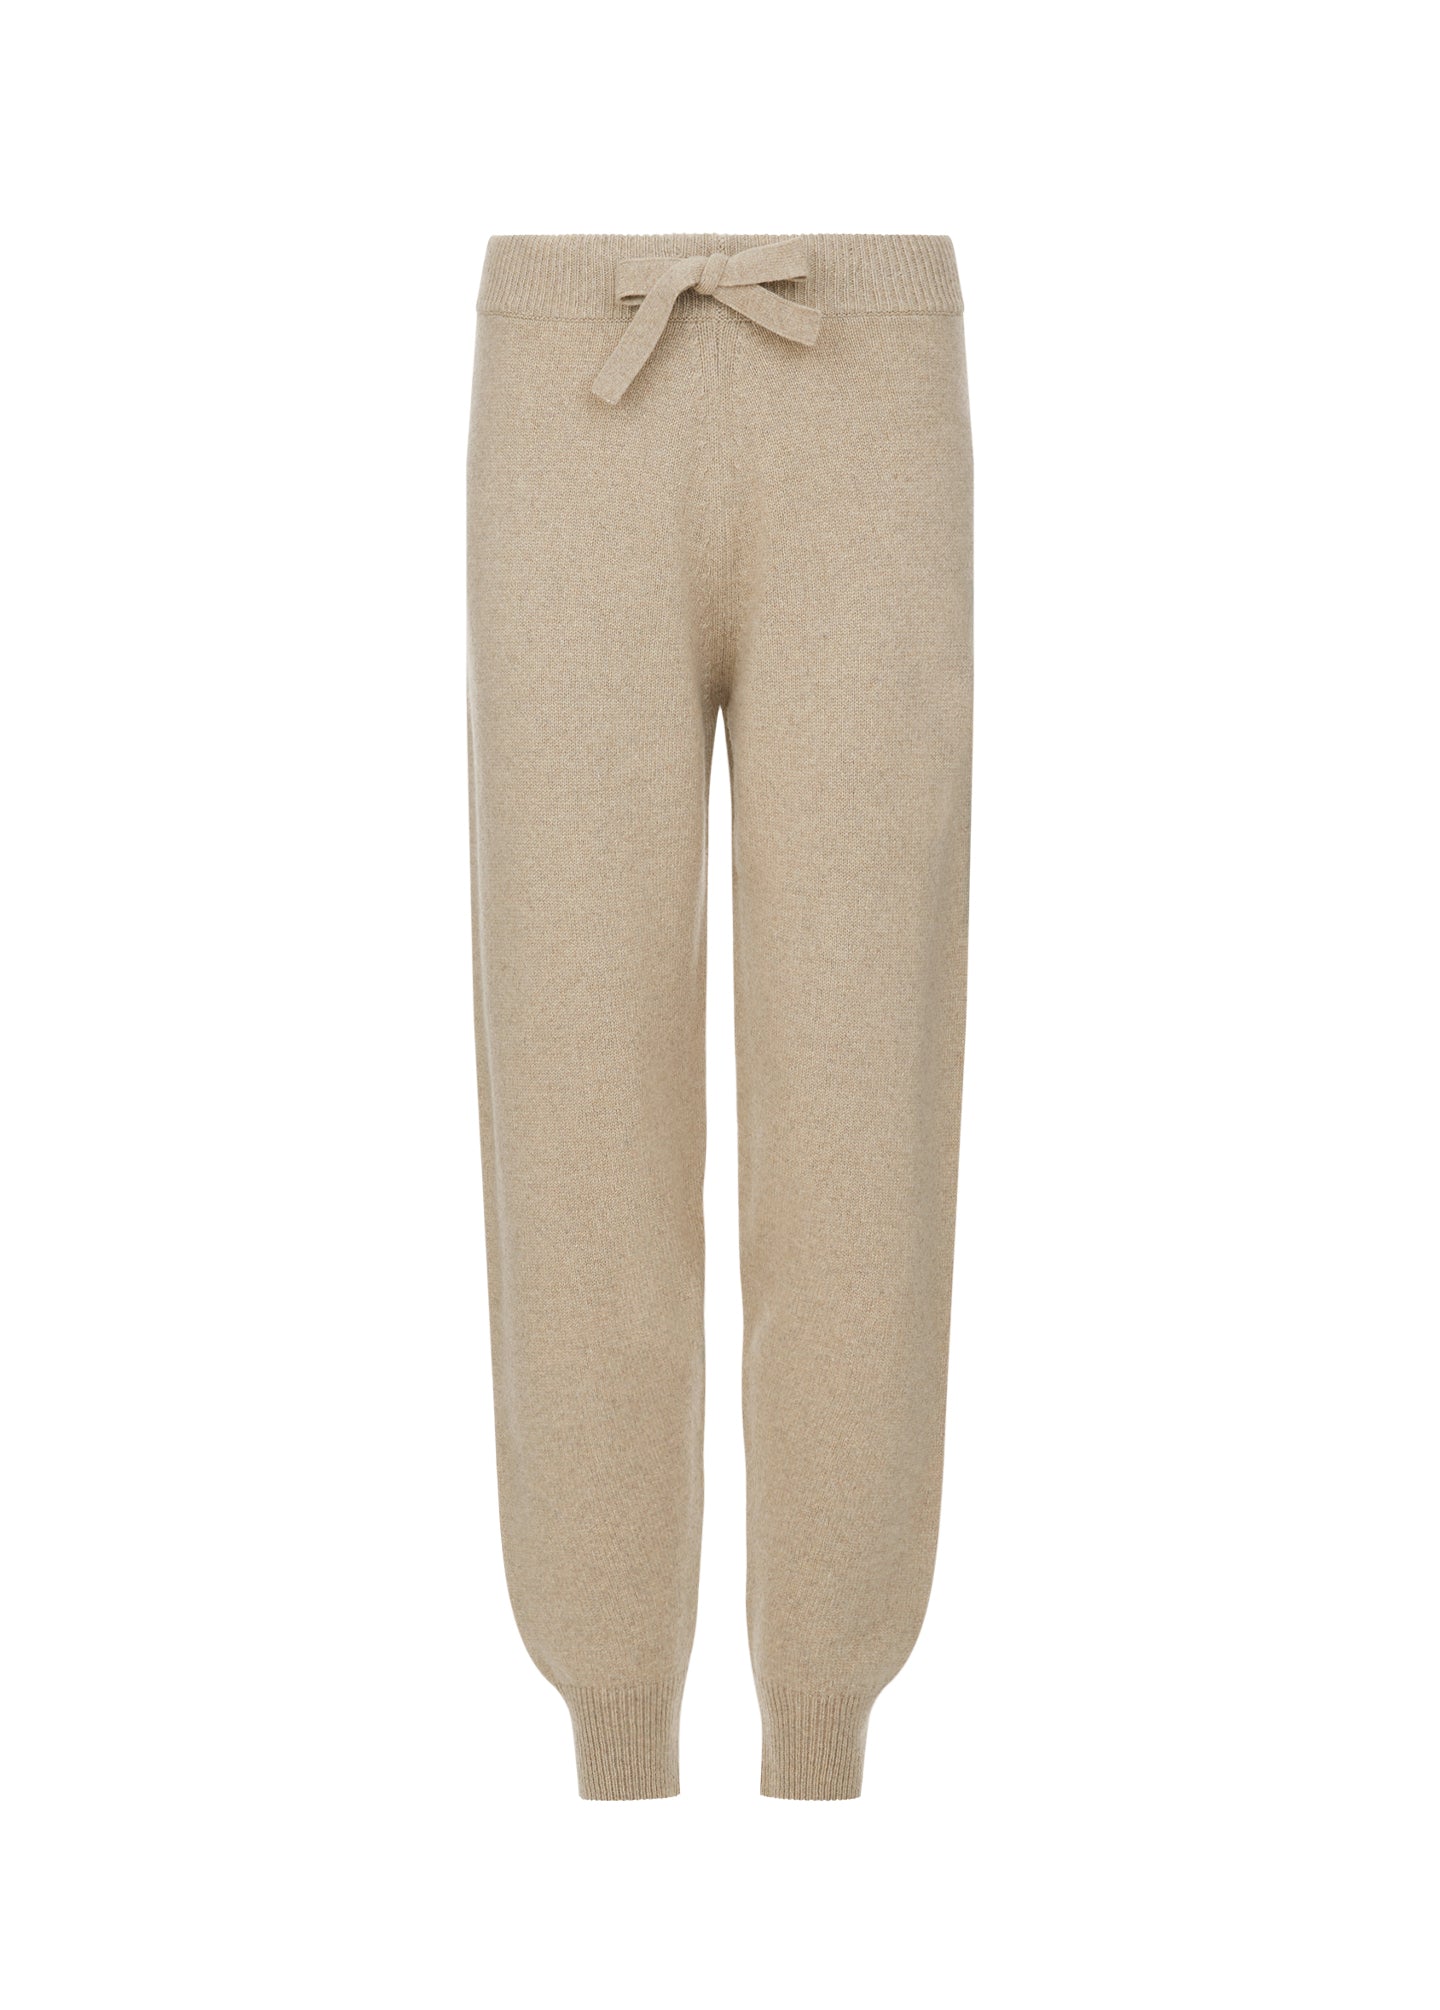 Women's cashmere cuffed joggers in Sand